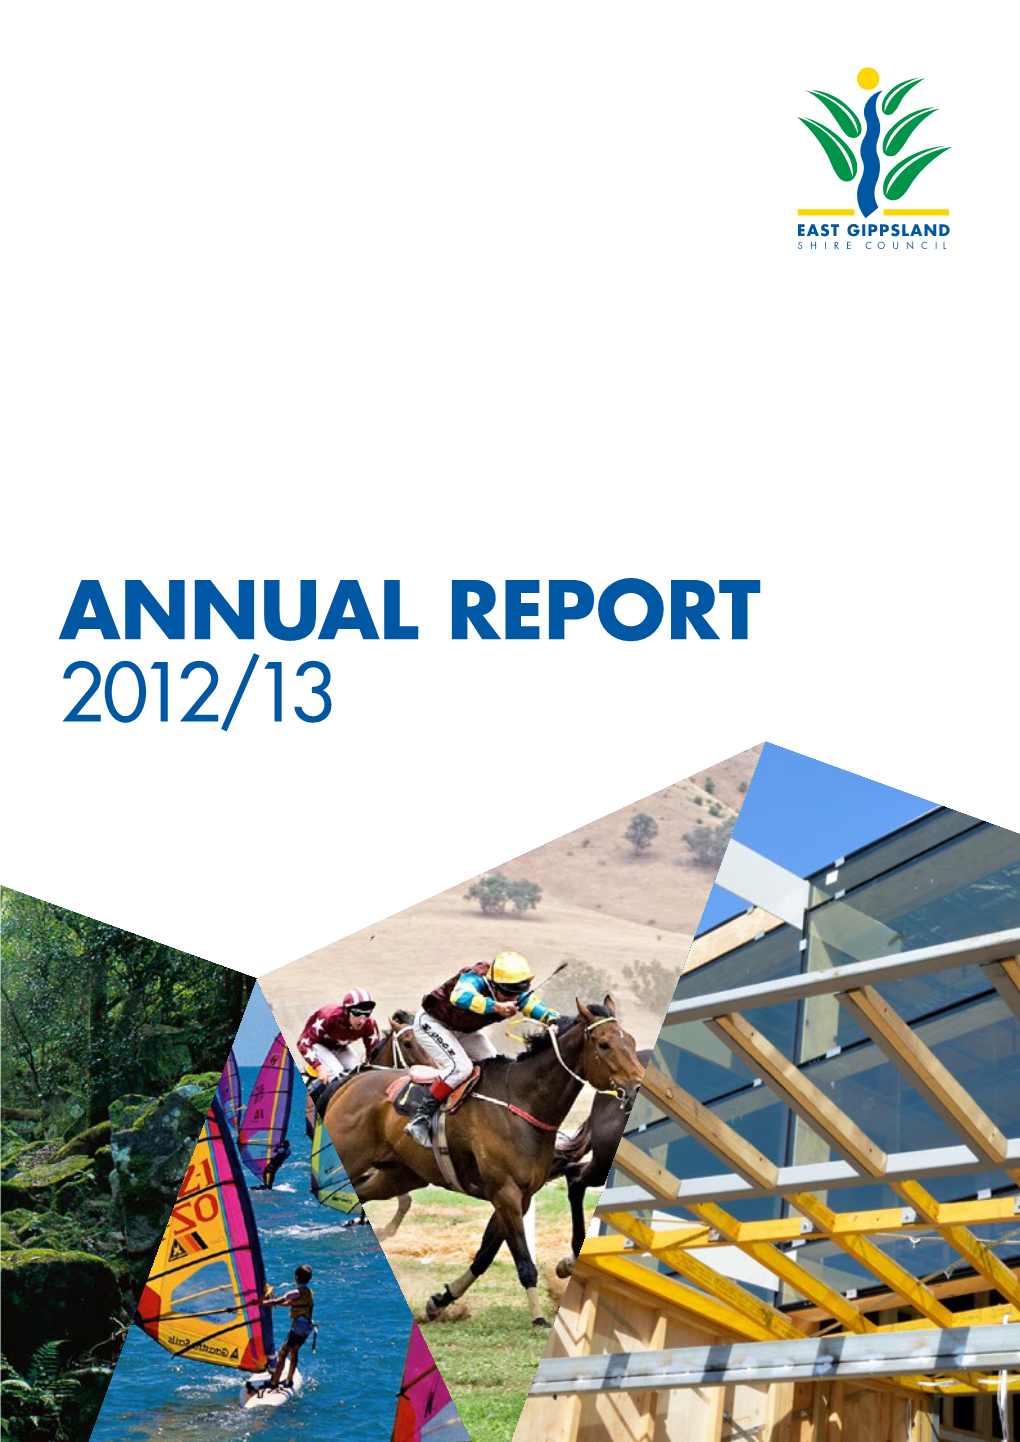 East Gippsland Shire Council Annual Report 2012/13